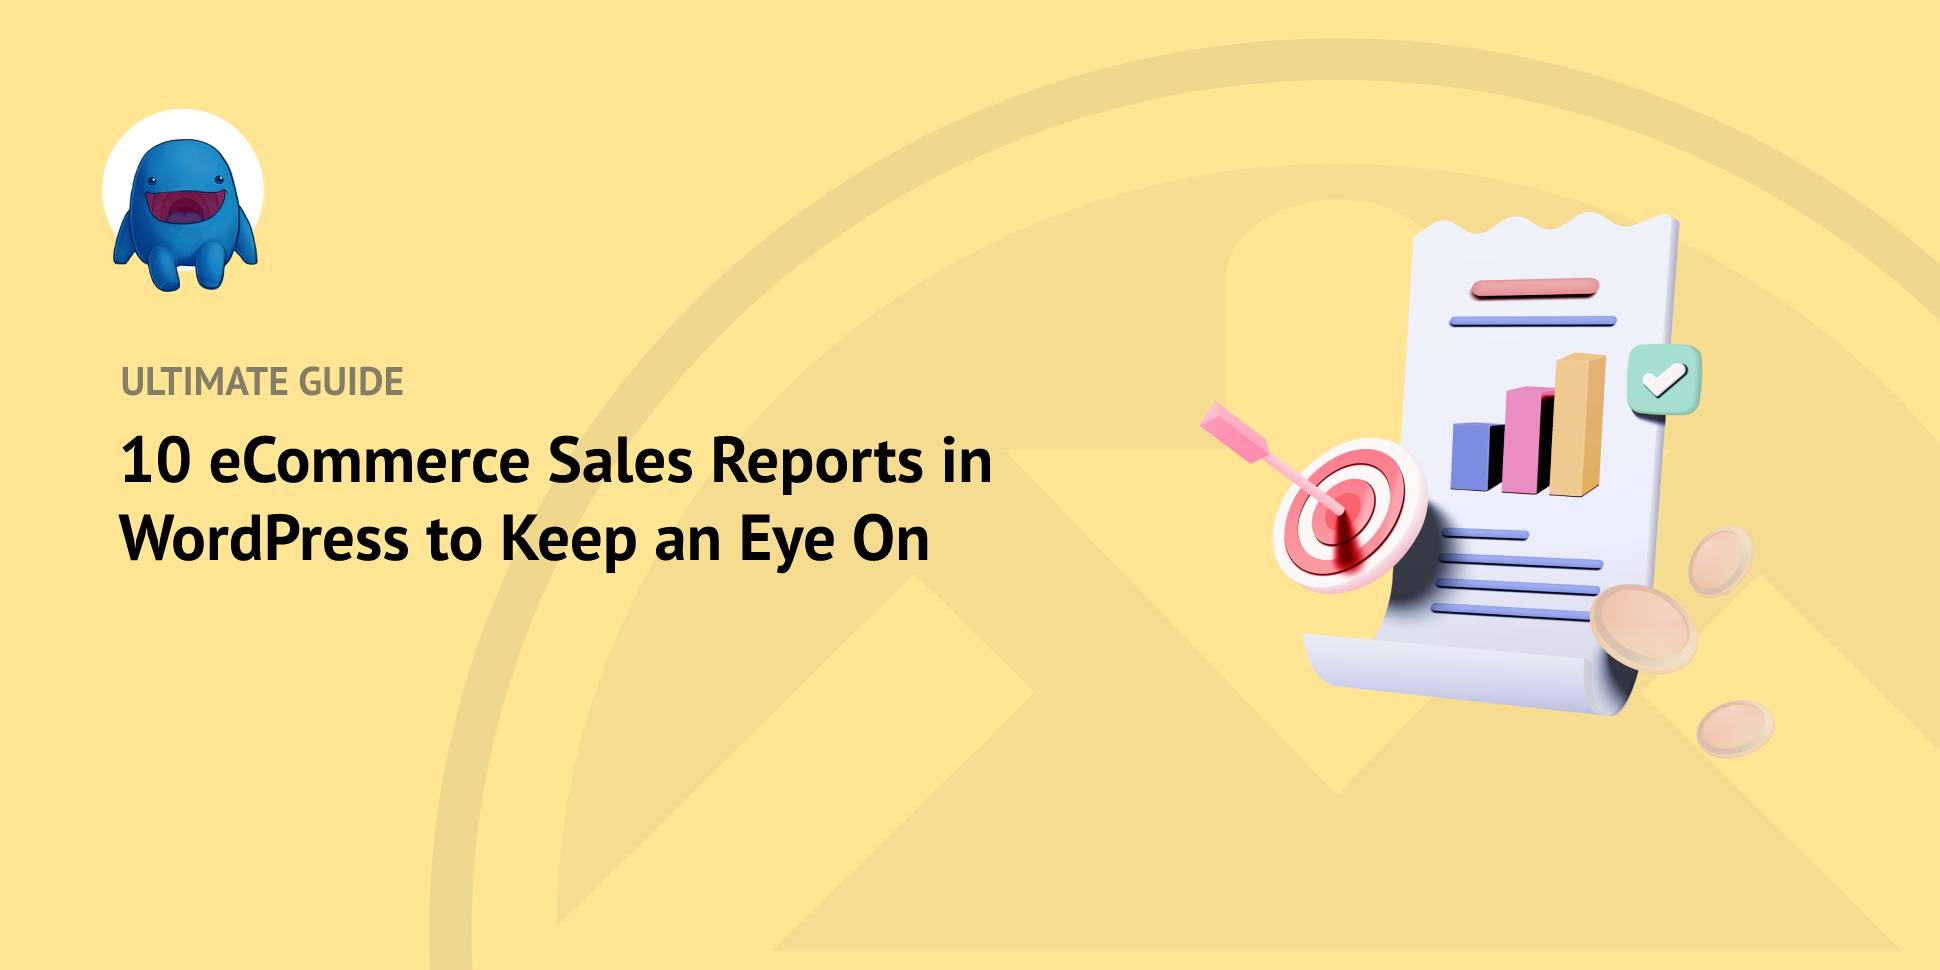 10 eCommerce Sales Reports in WordPress to Keep an Eye On